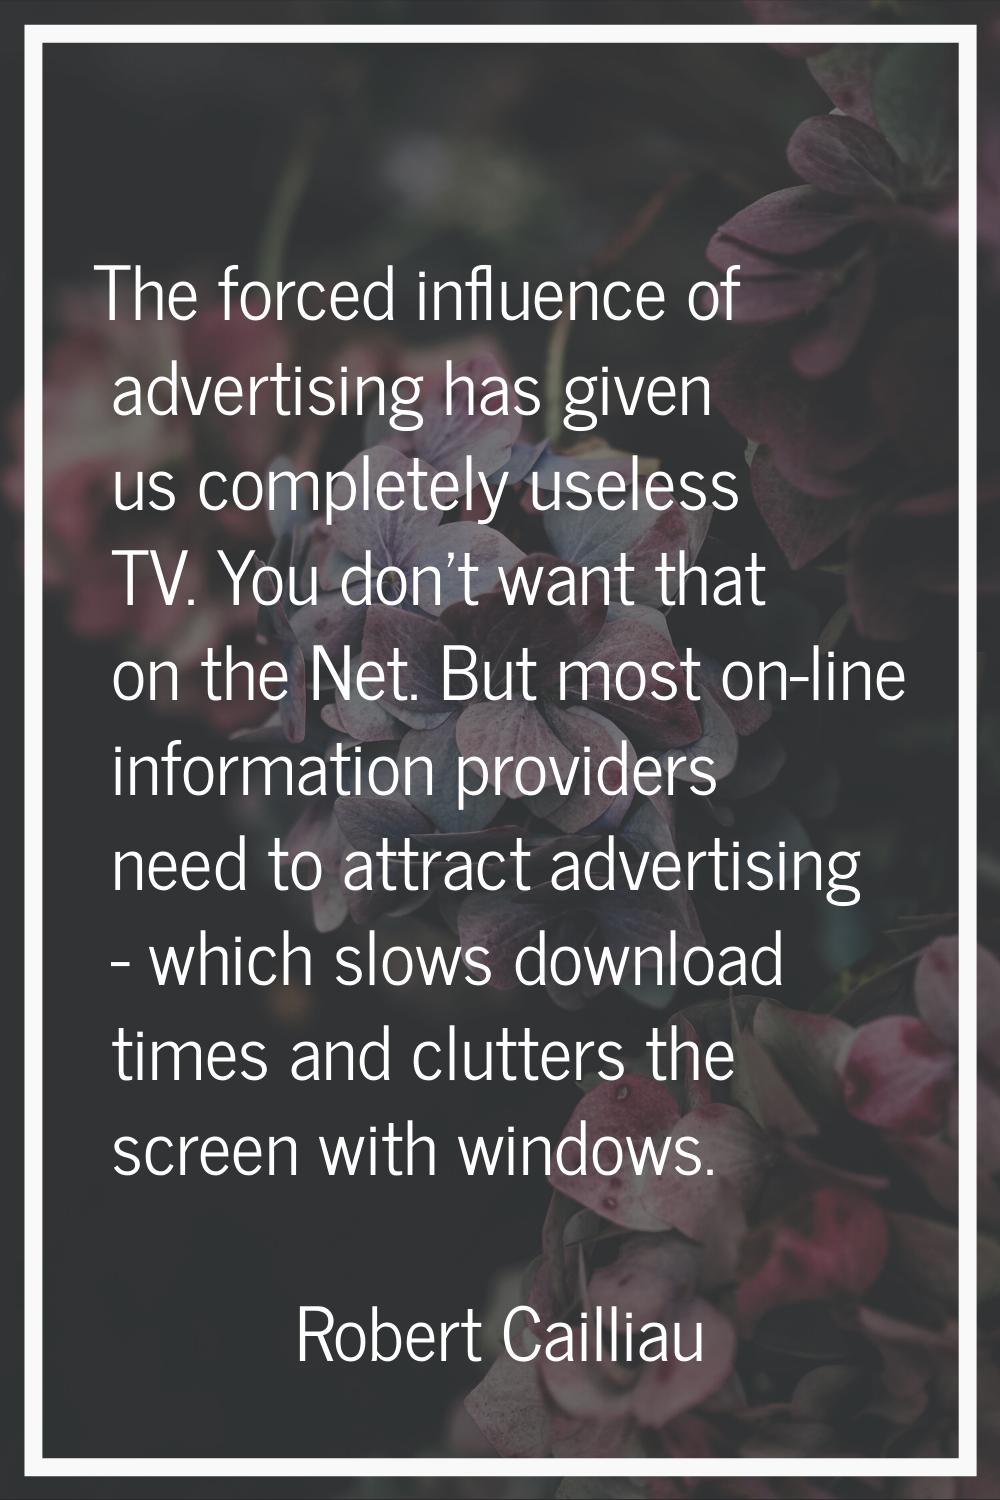 The forced influence of advertising has given us completely useless TV. You don't want that on the 